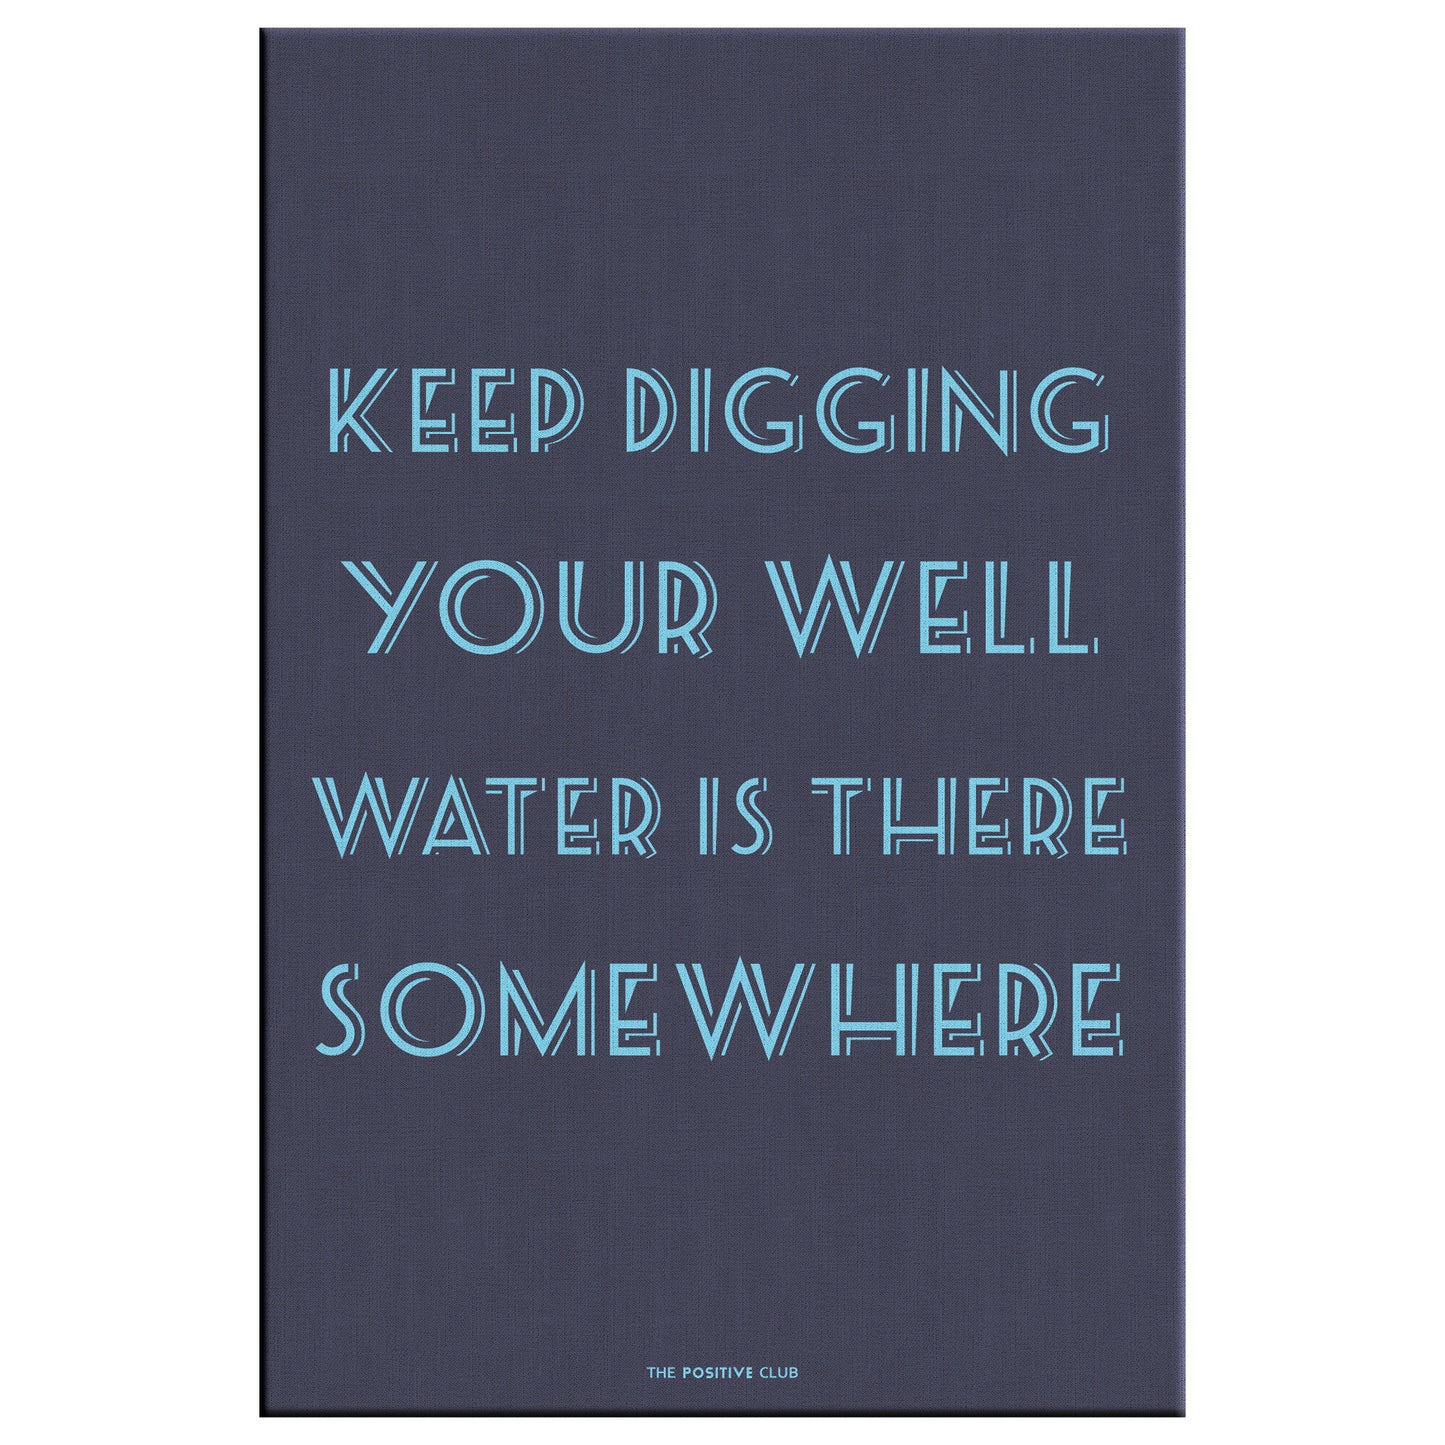 KEEP DIGGING YOUR WELL WATER IS THERE SOMEWHERE